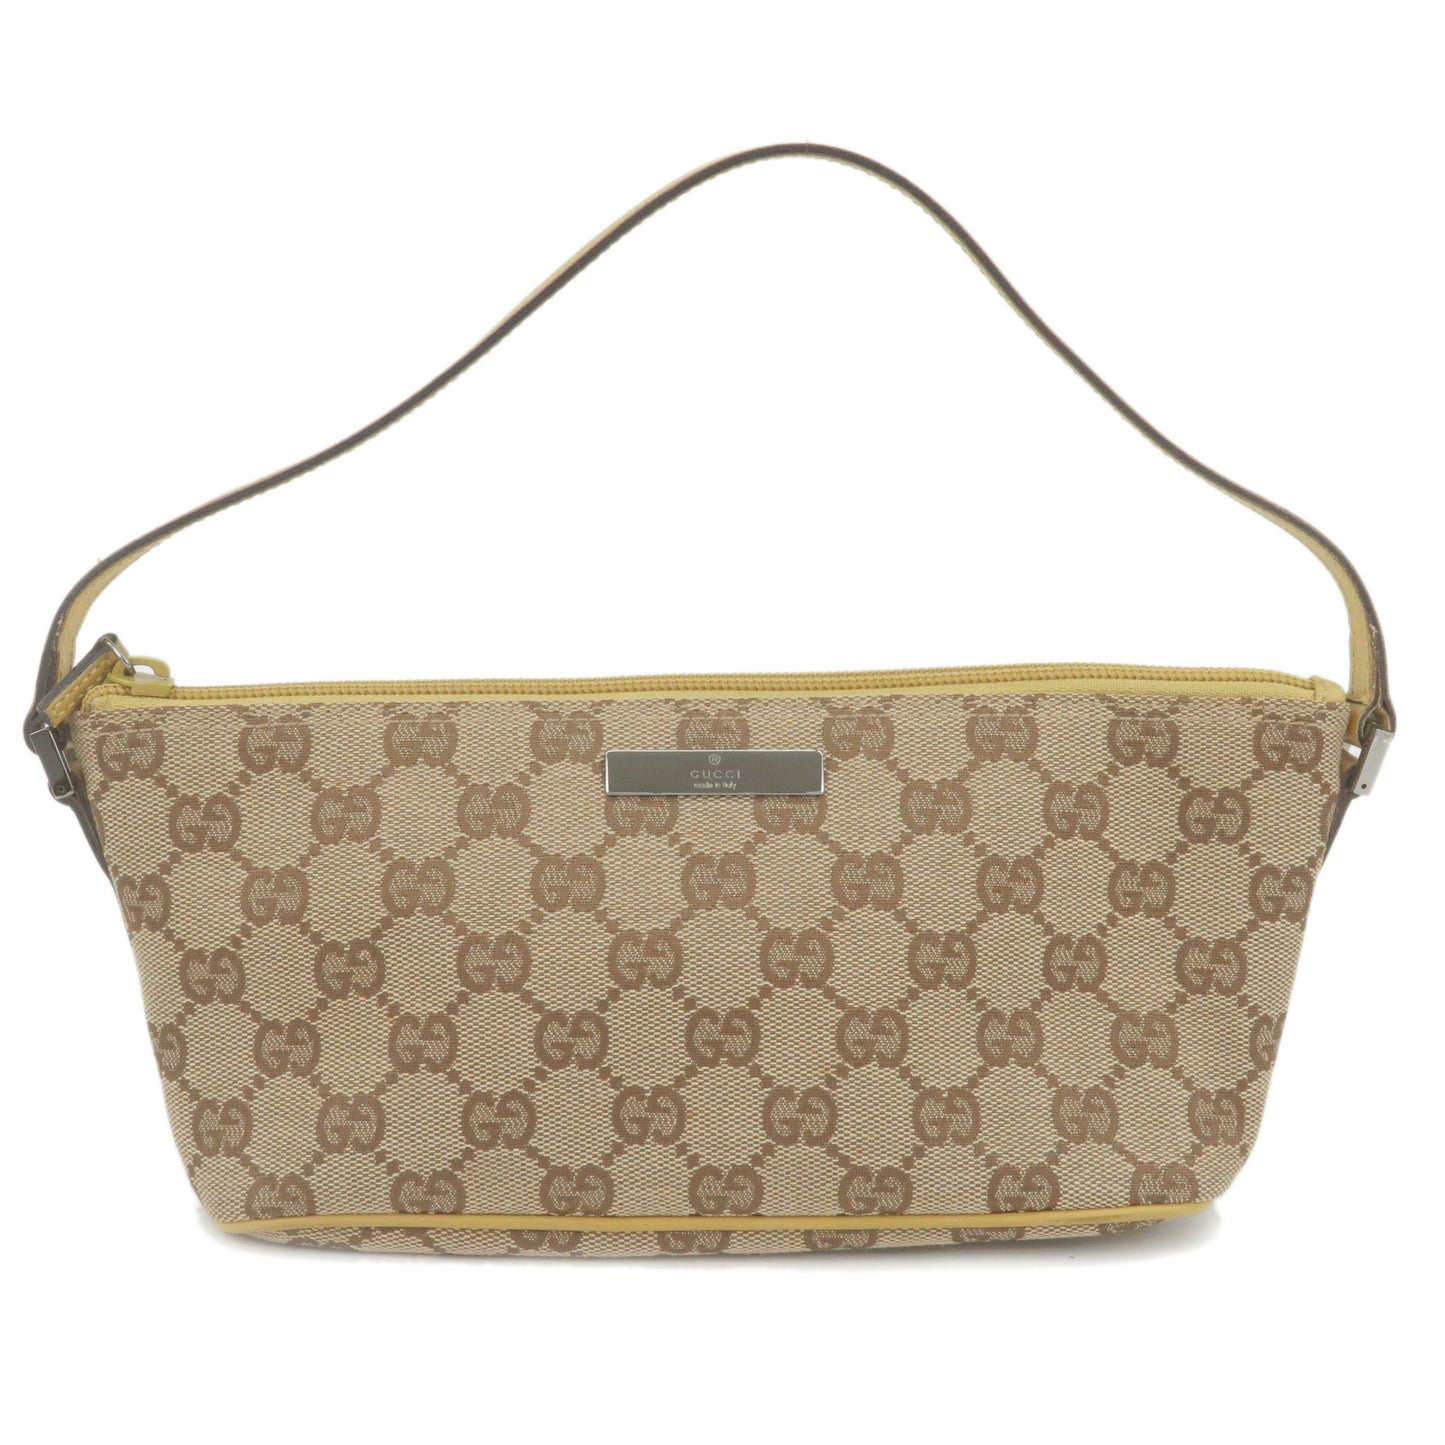 GUCCI-GG-Canvas-Leather-Pouch-Boat-Bag-Brown-Yellow-07198